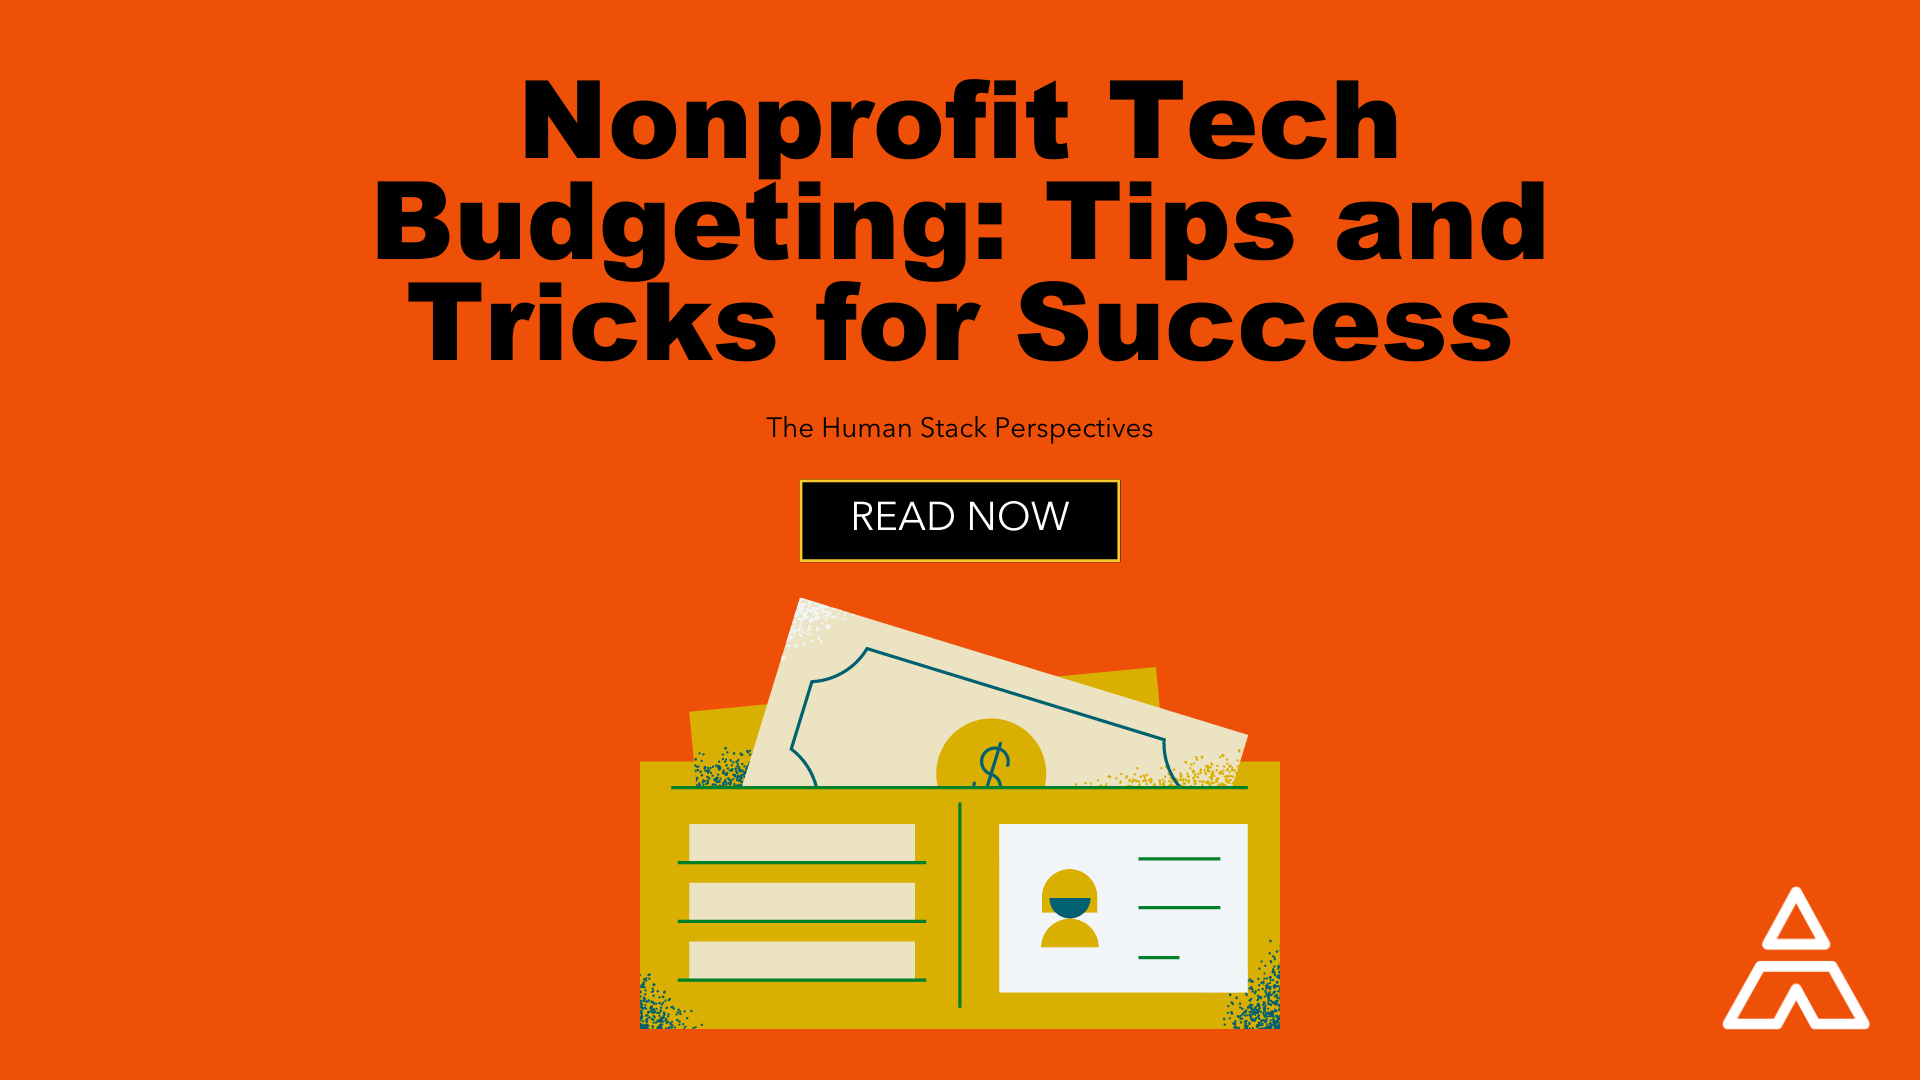 The Human Stack - Nonprofit Tech Budgeting Tips and Tricks for Success